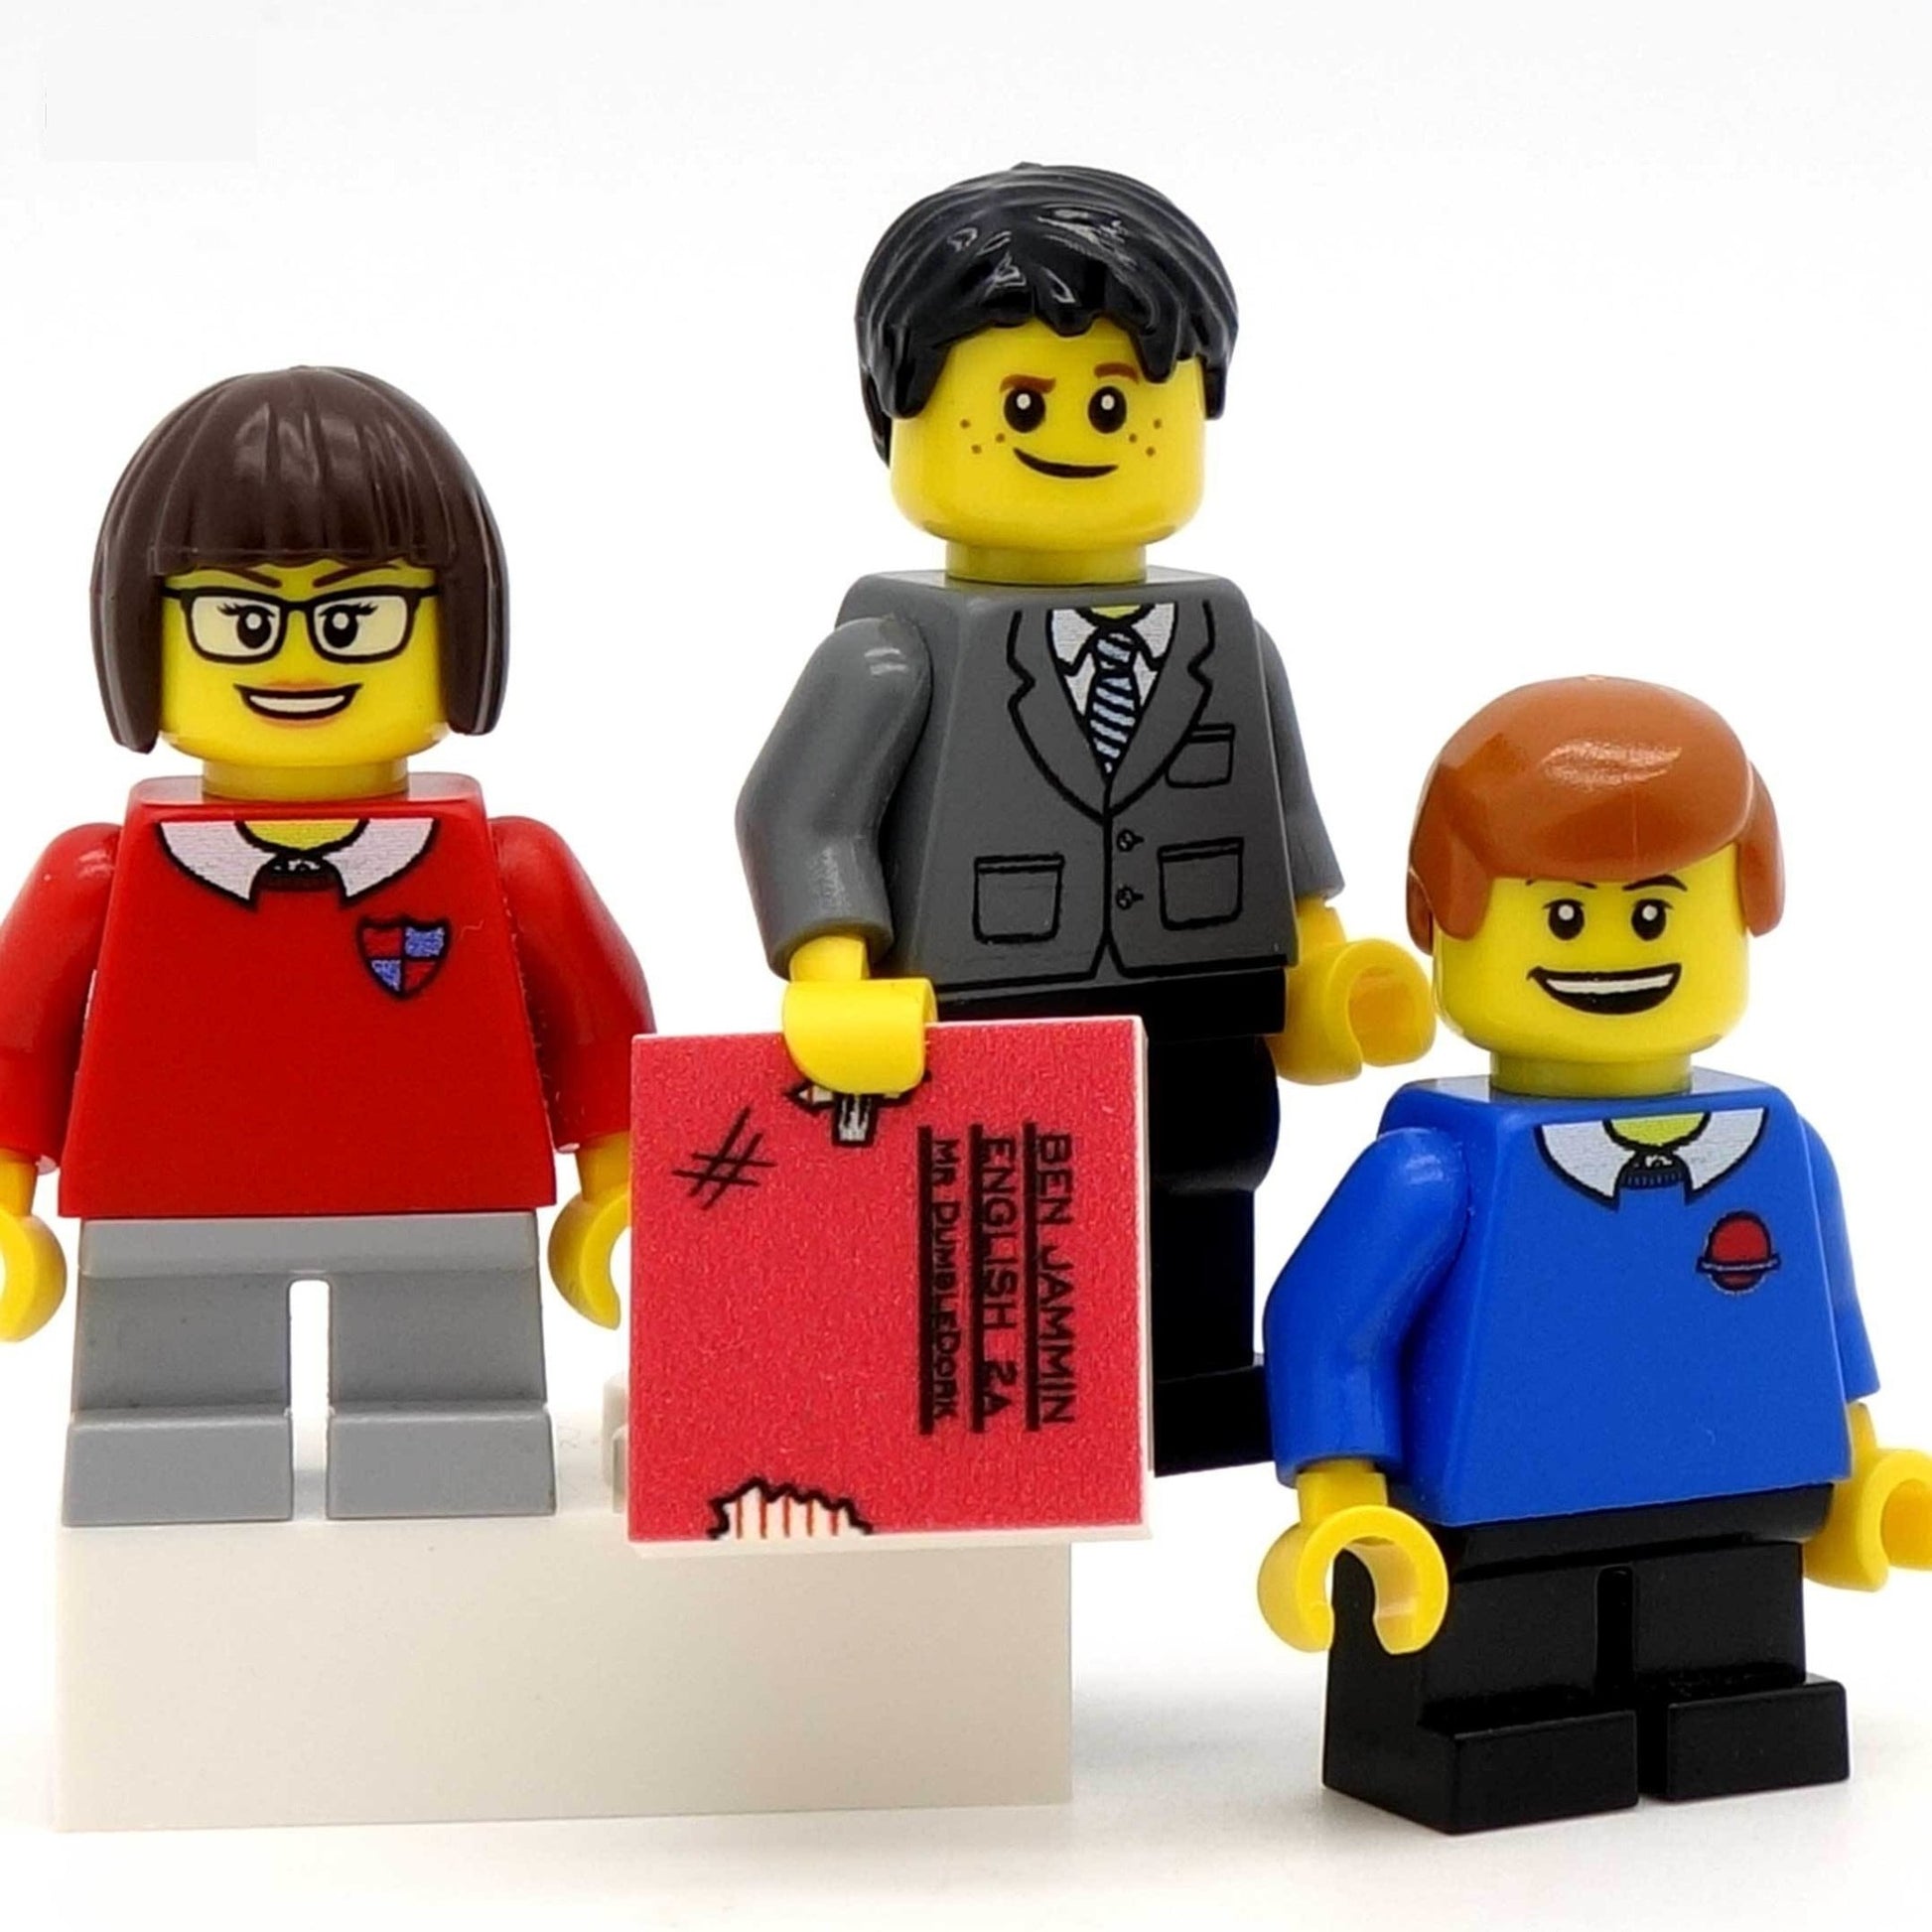 Minifig Holding Scruffy Notebook with Minifigs in School Uniform